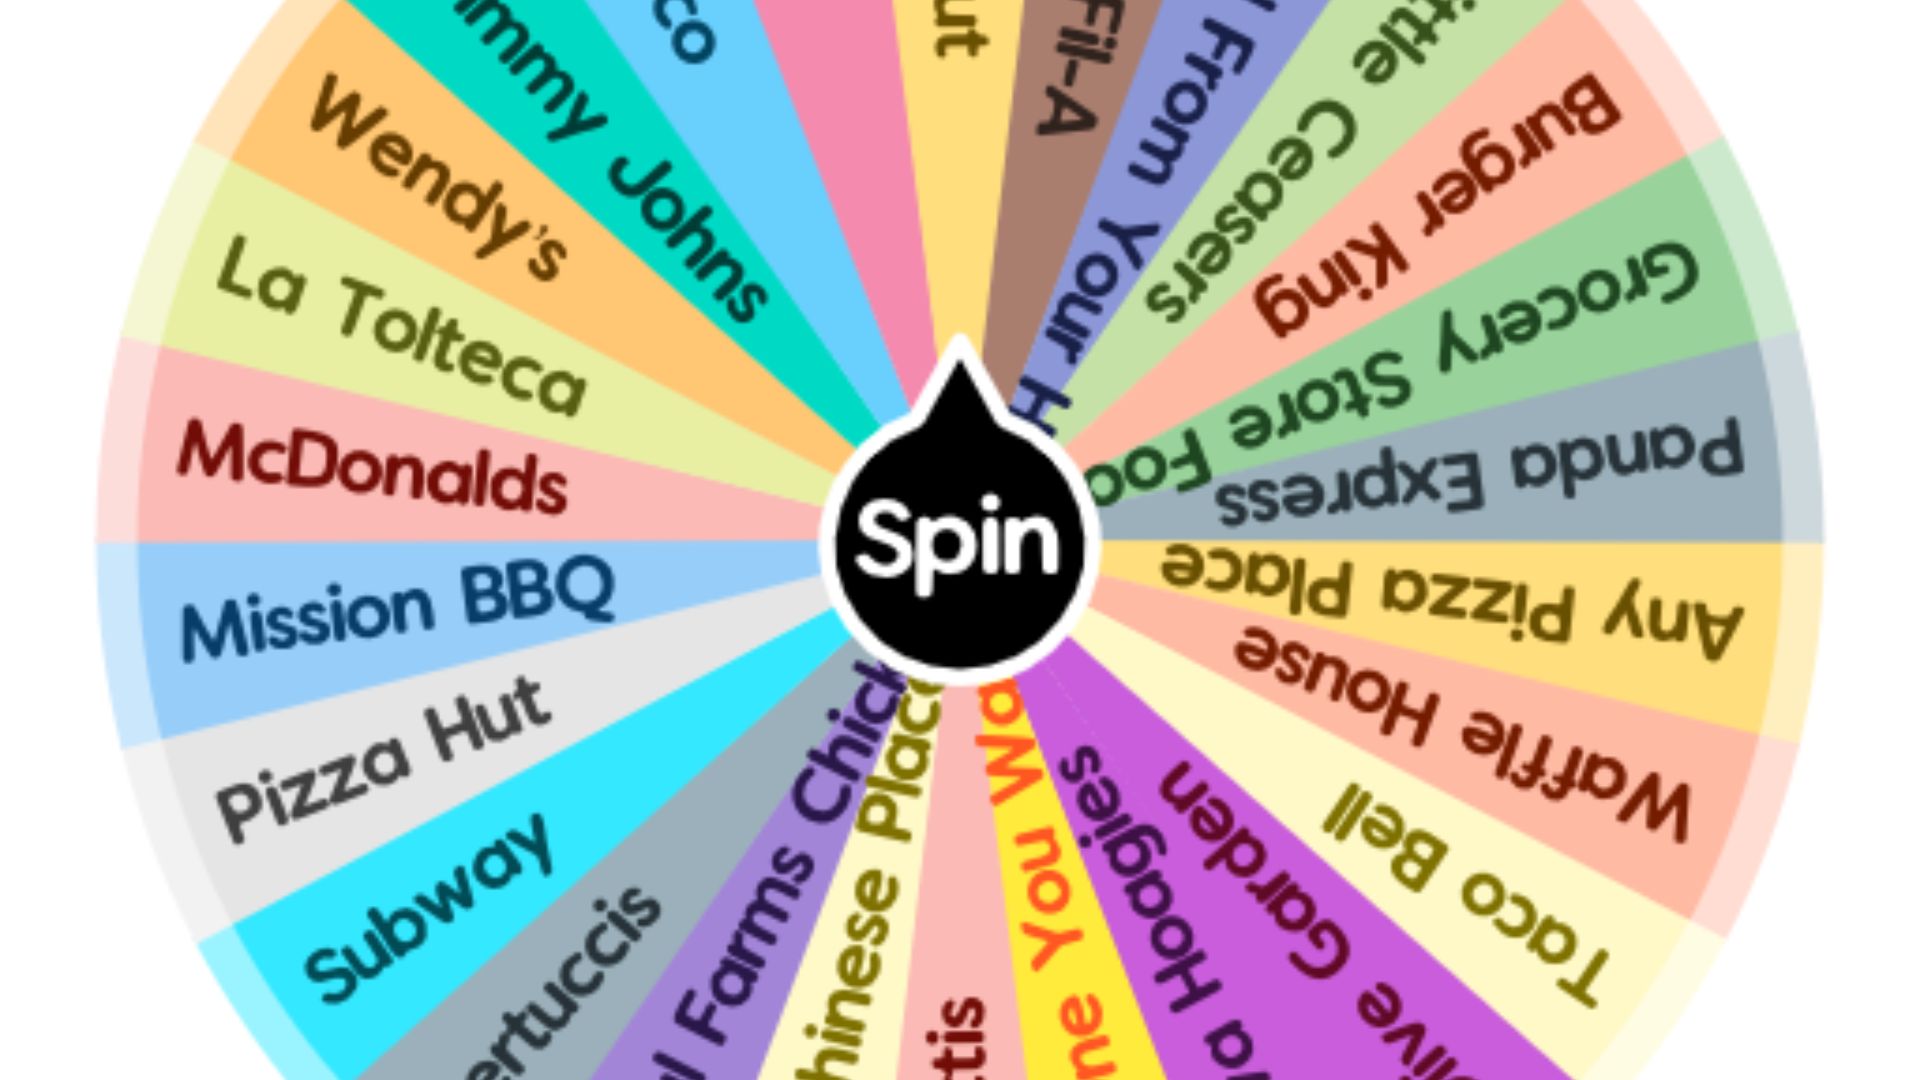 this image shows Spin the Wheel Activities for Choosing a Restaurant